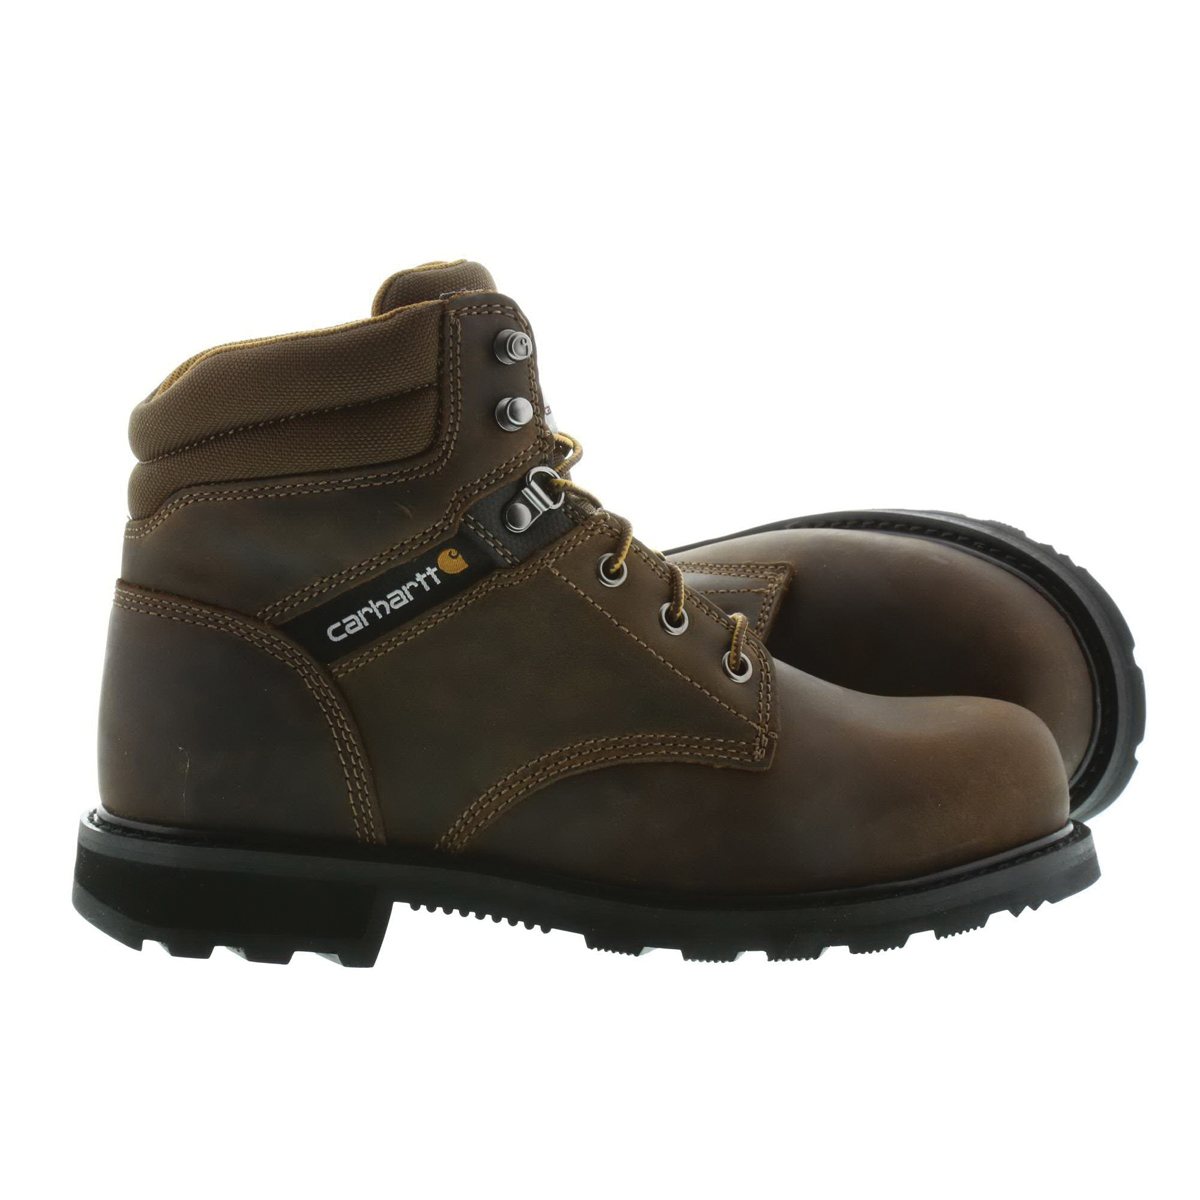 Carhartt CMW6174-11M Work Boots, 11, M W, Dark Brown Oil Tanned, Leather Upper, Lace-Up Closure - 3